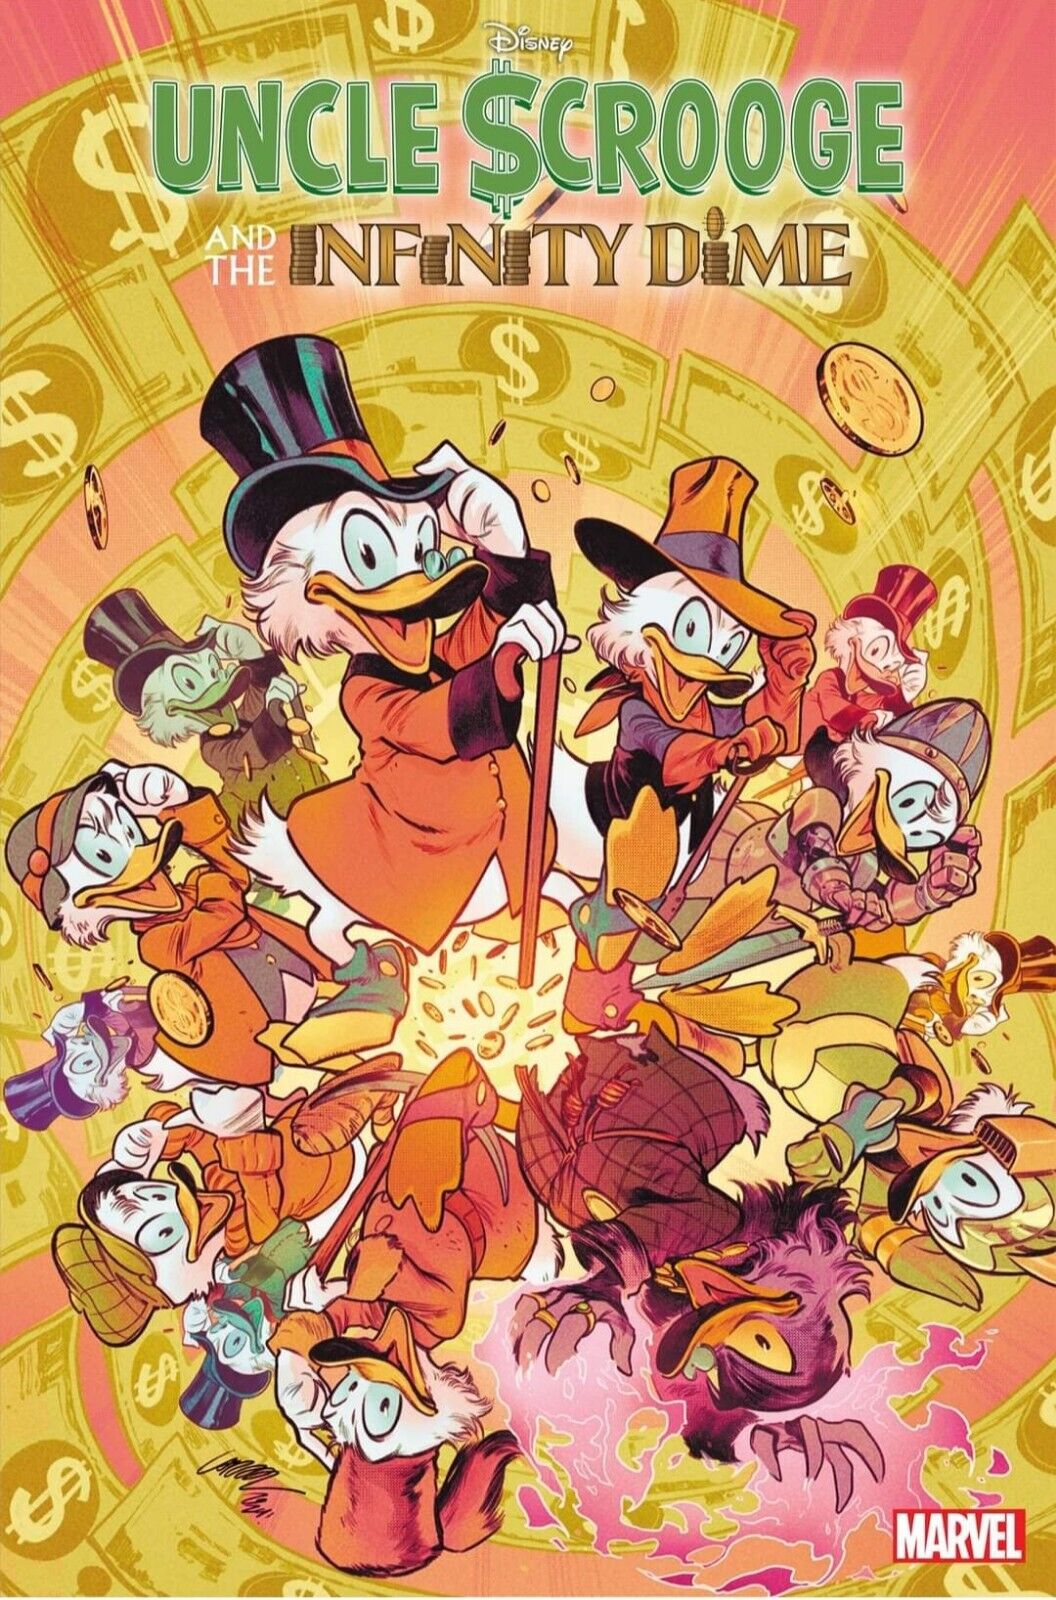 Uncle Scrooge and the Infinity Dime #1 Pepe Larraz 1:100 Variant PRESALE 6/19